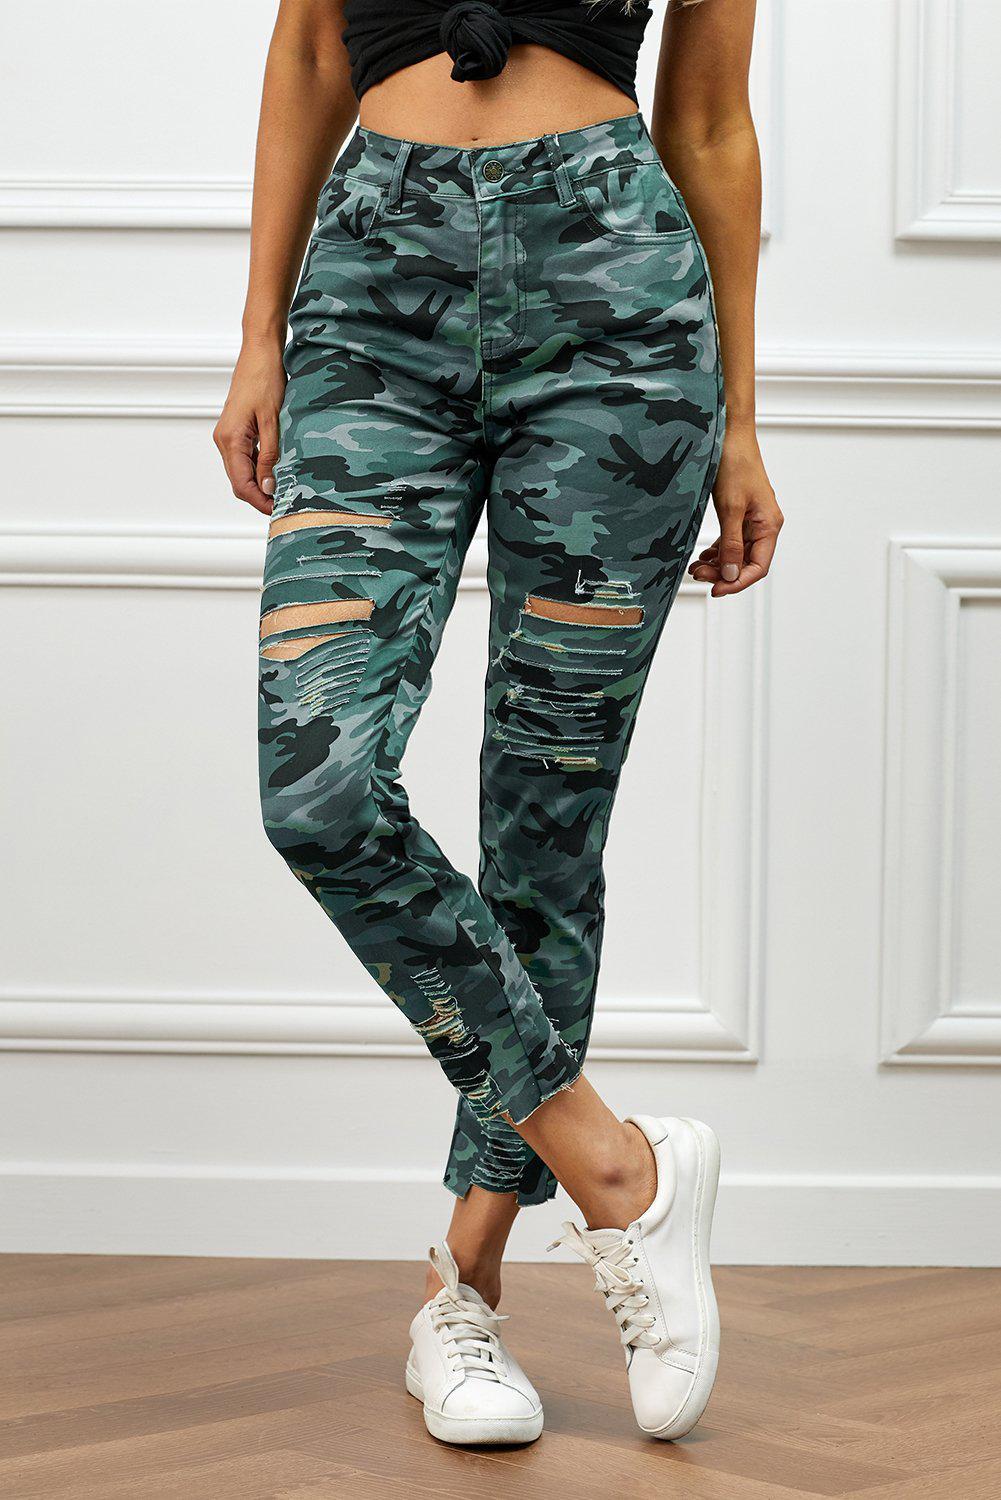 Distressed Camouflage Jeans BLUE ZONE PLANET